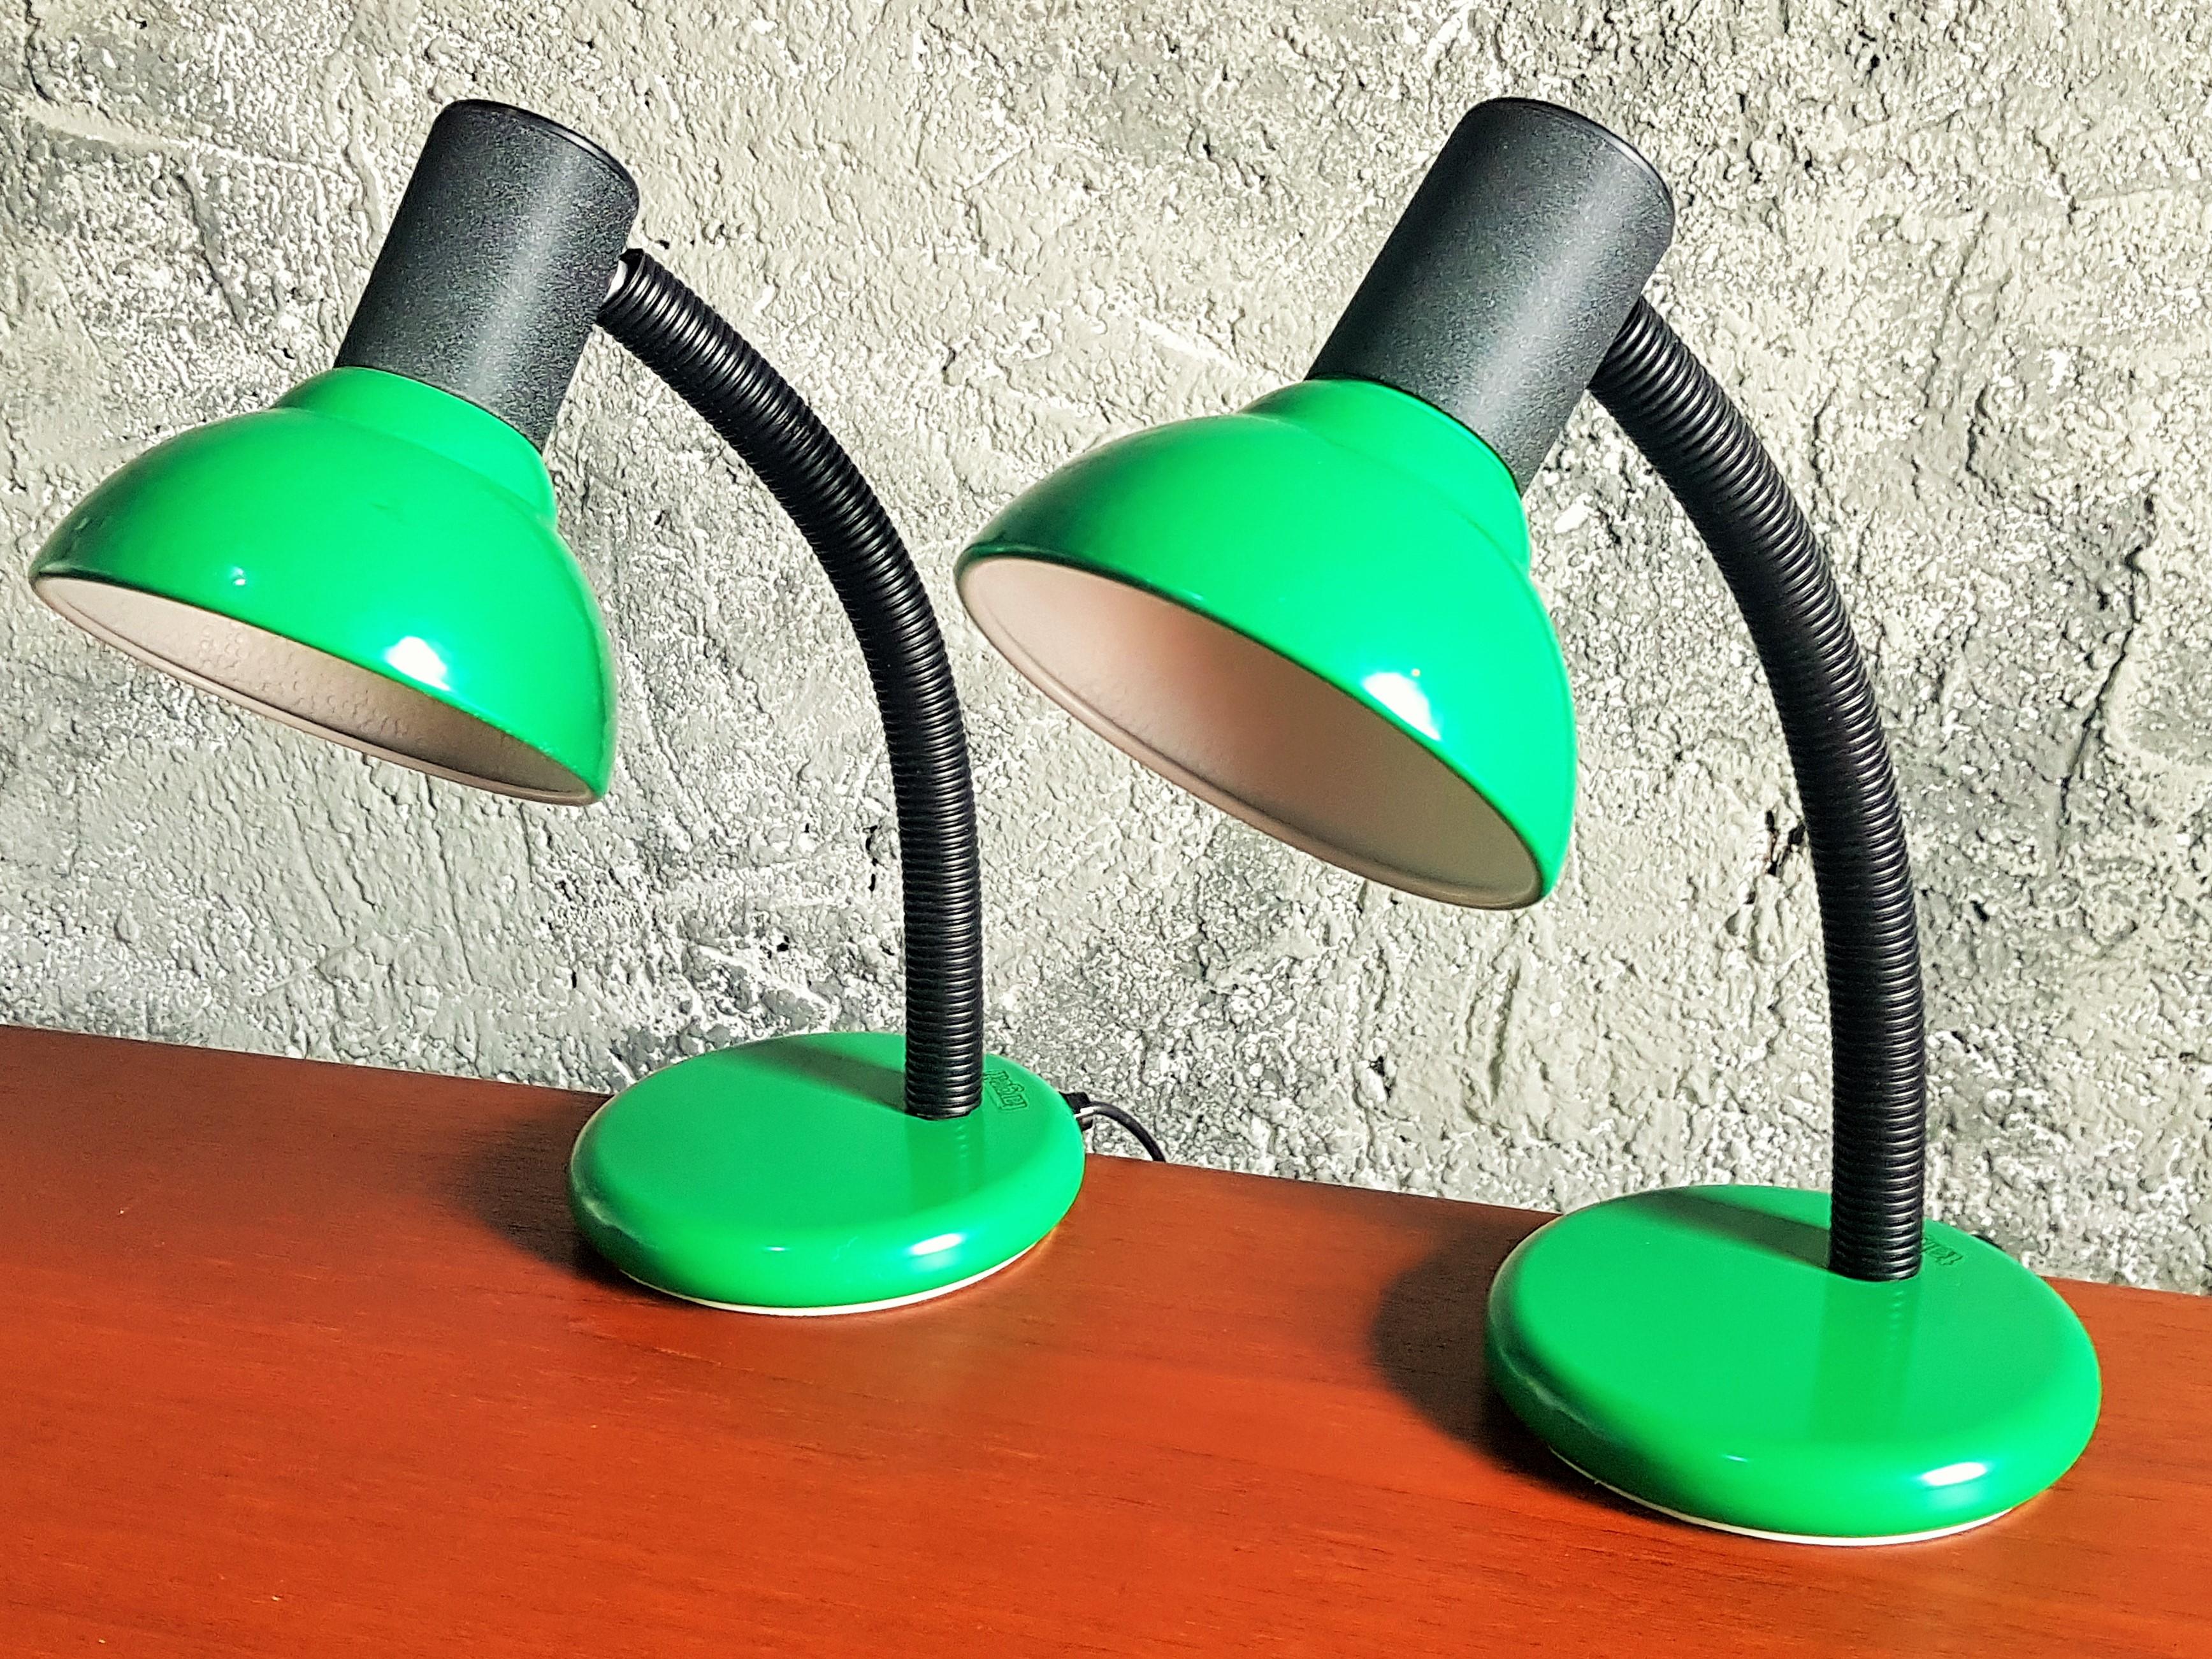 Post-Modern Midcentury Pair of Table Desk Lamps, Targetti, Italy, 1982 For Sale 5